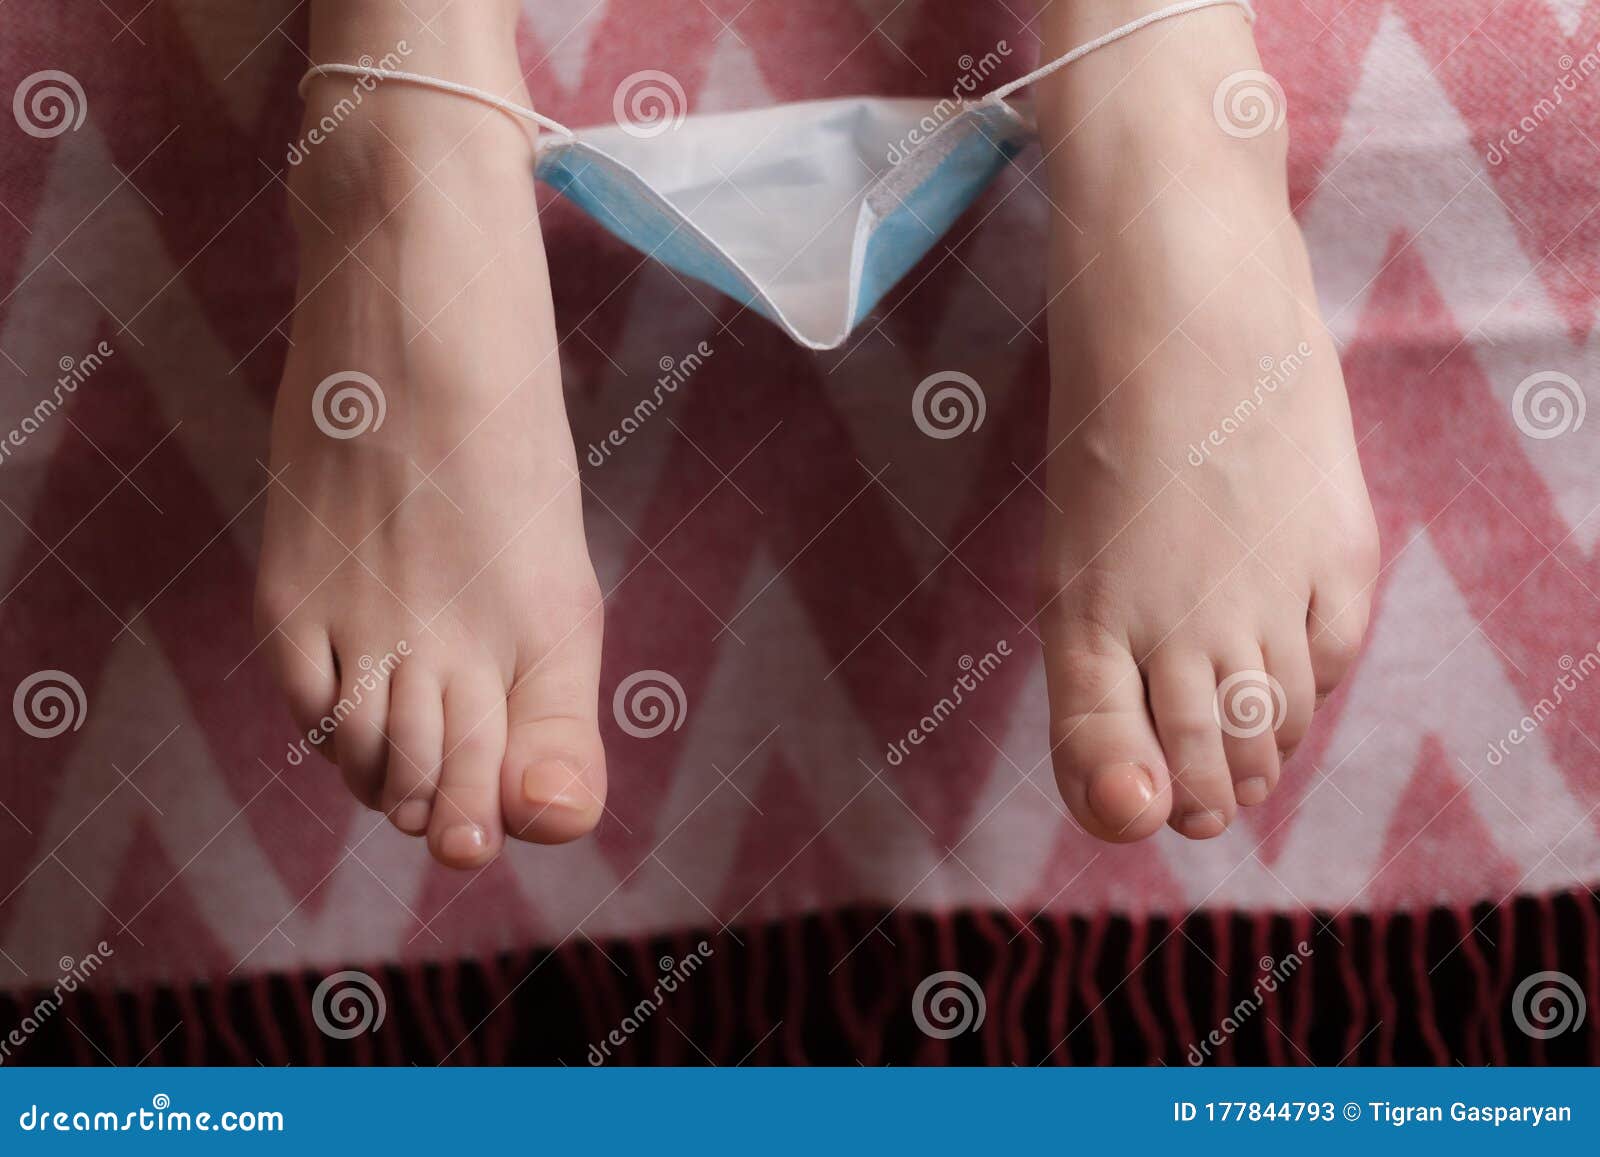 Female Legs Take Off Panties in the Form of a Medical Mask. Safe Sex  Concept. Security during the Quarantine of COVID-19 Stock Image - Image of  mask, passion: 177844793